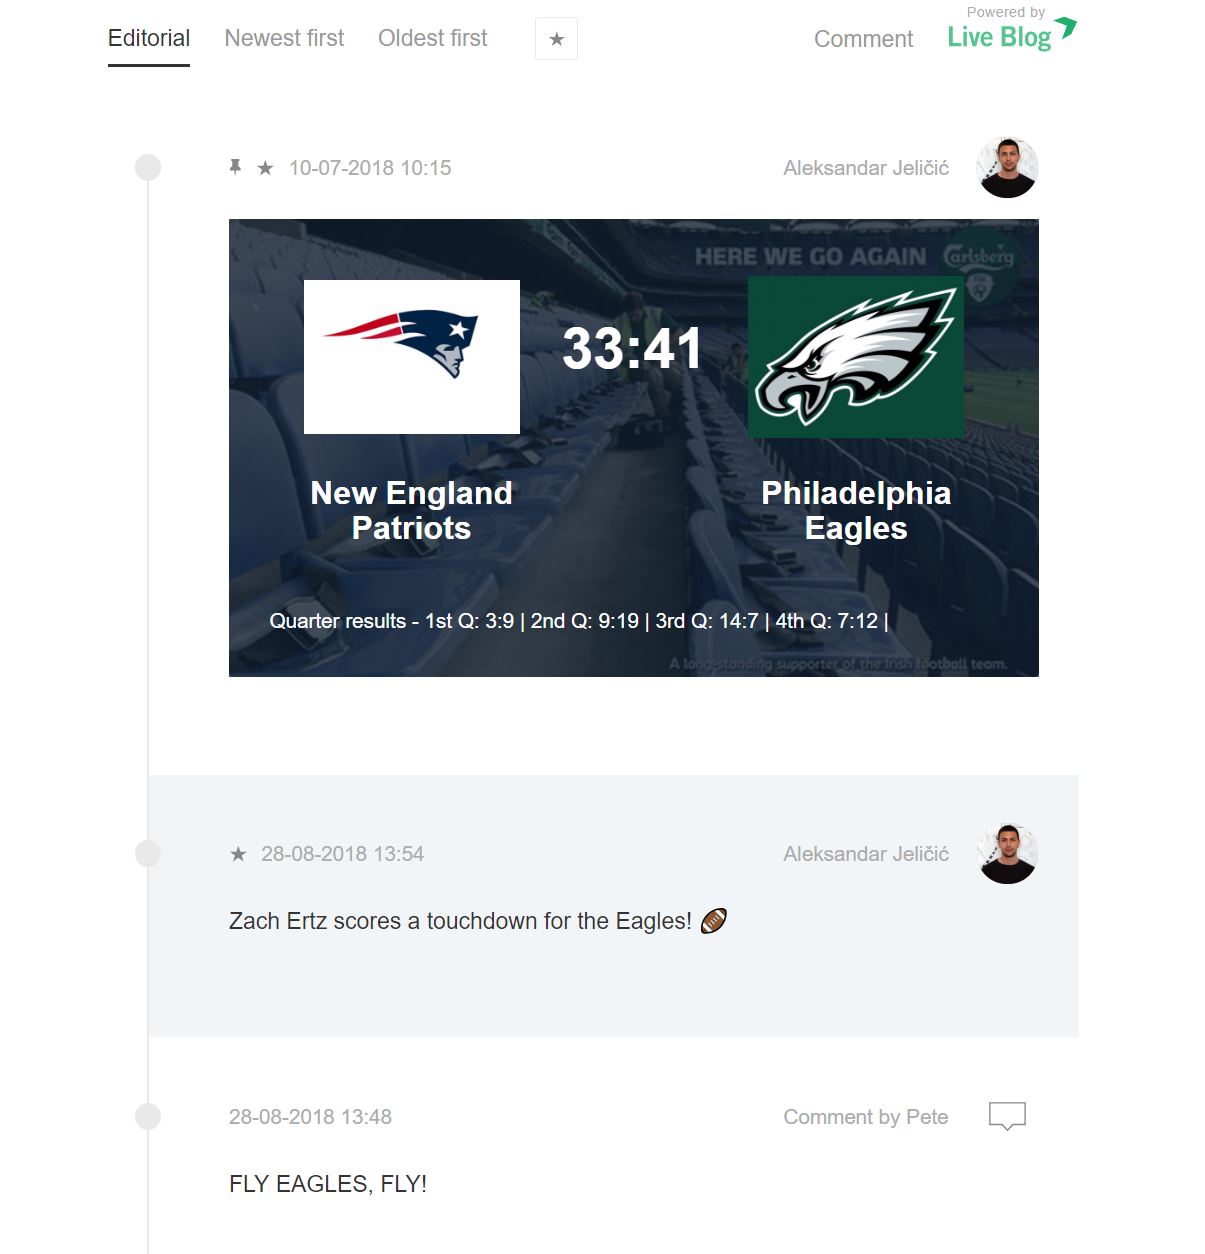 Live blogging an American football game